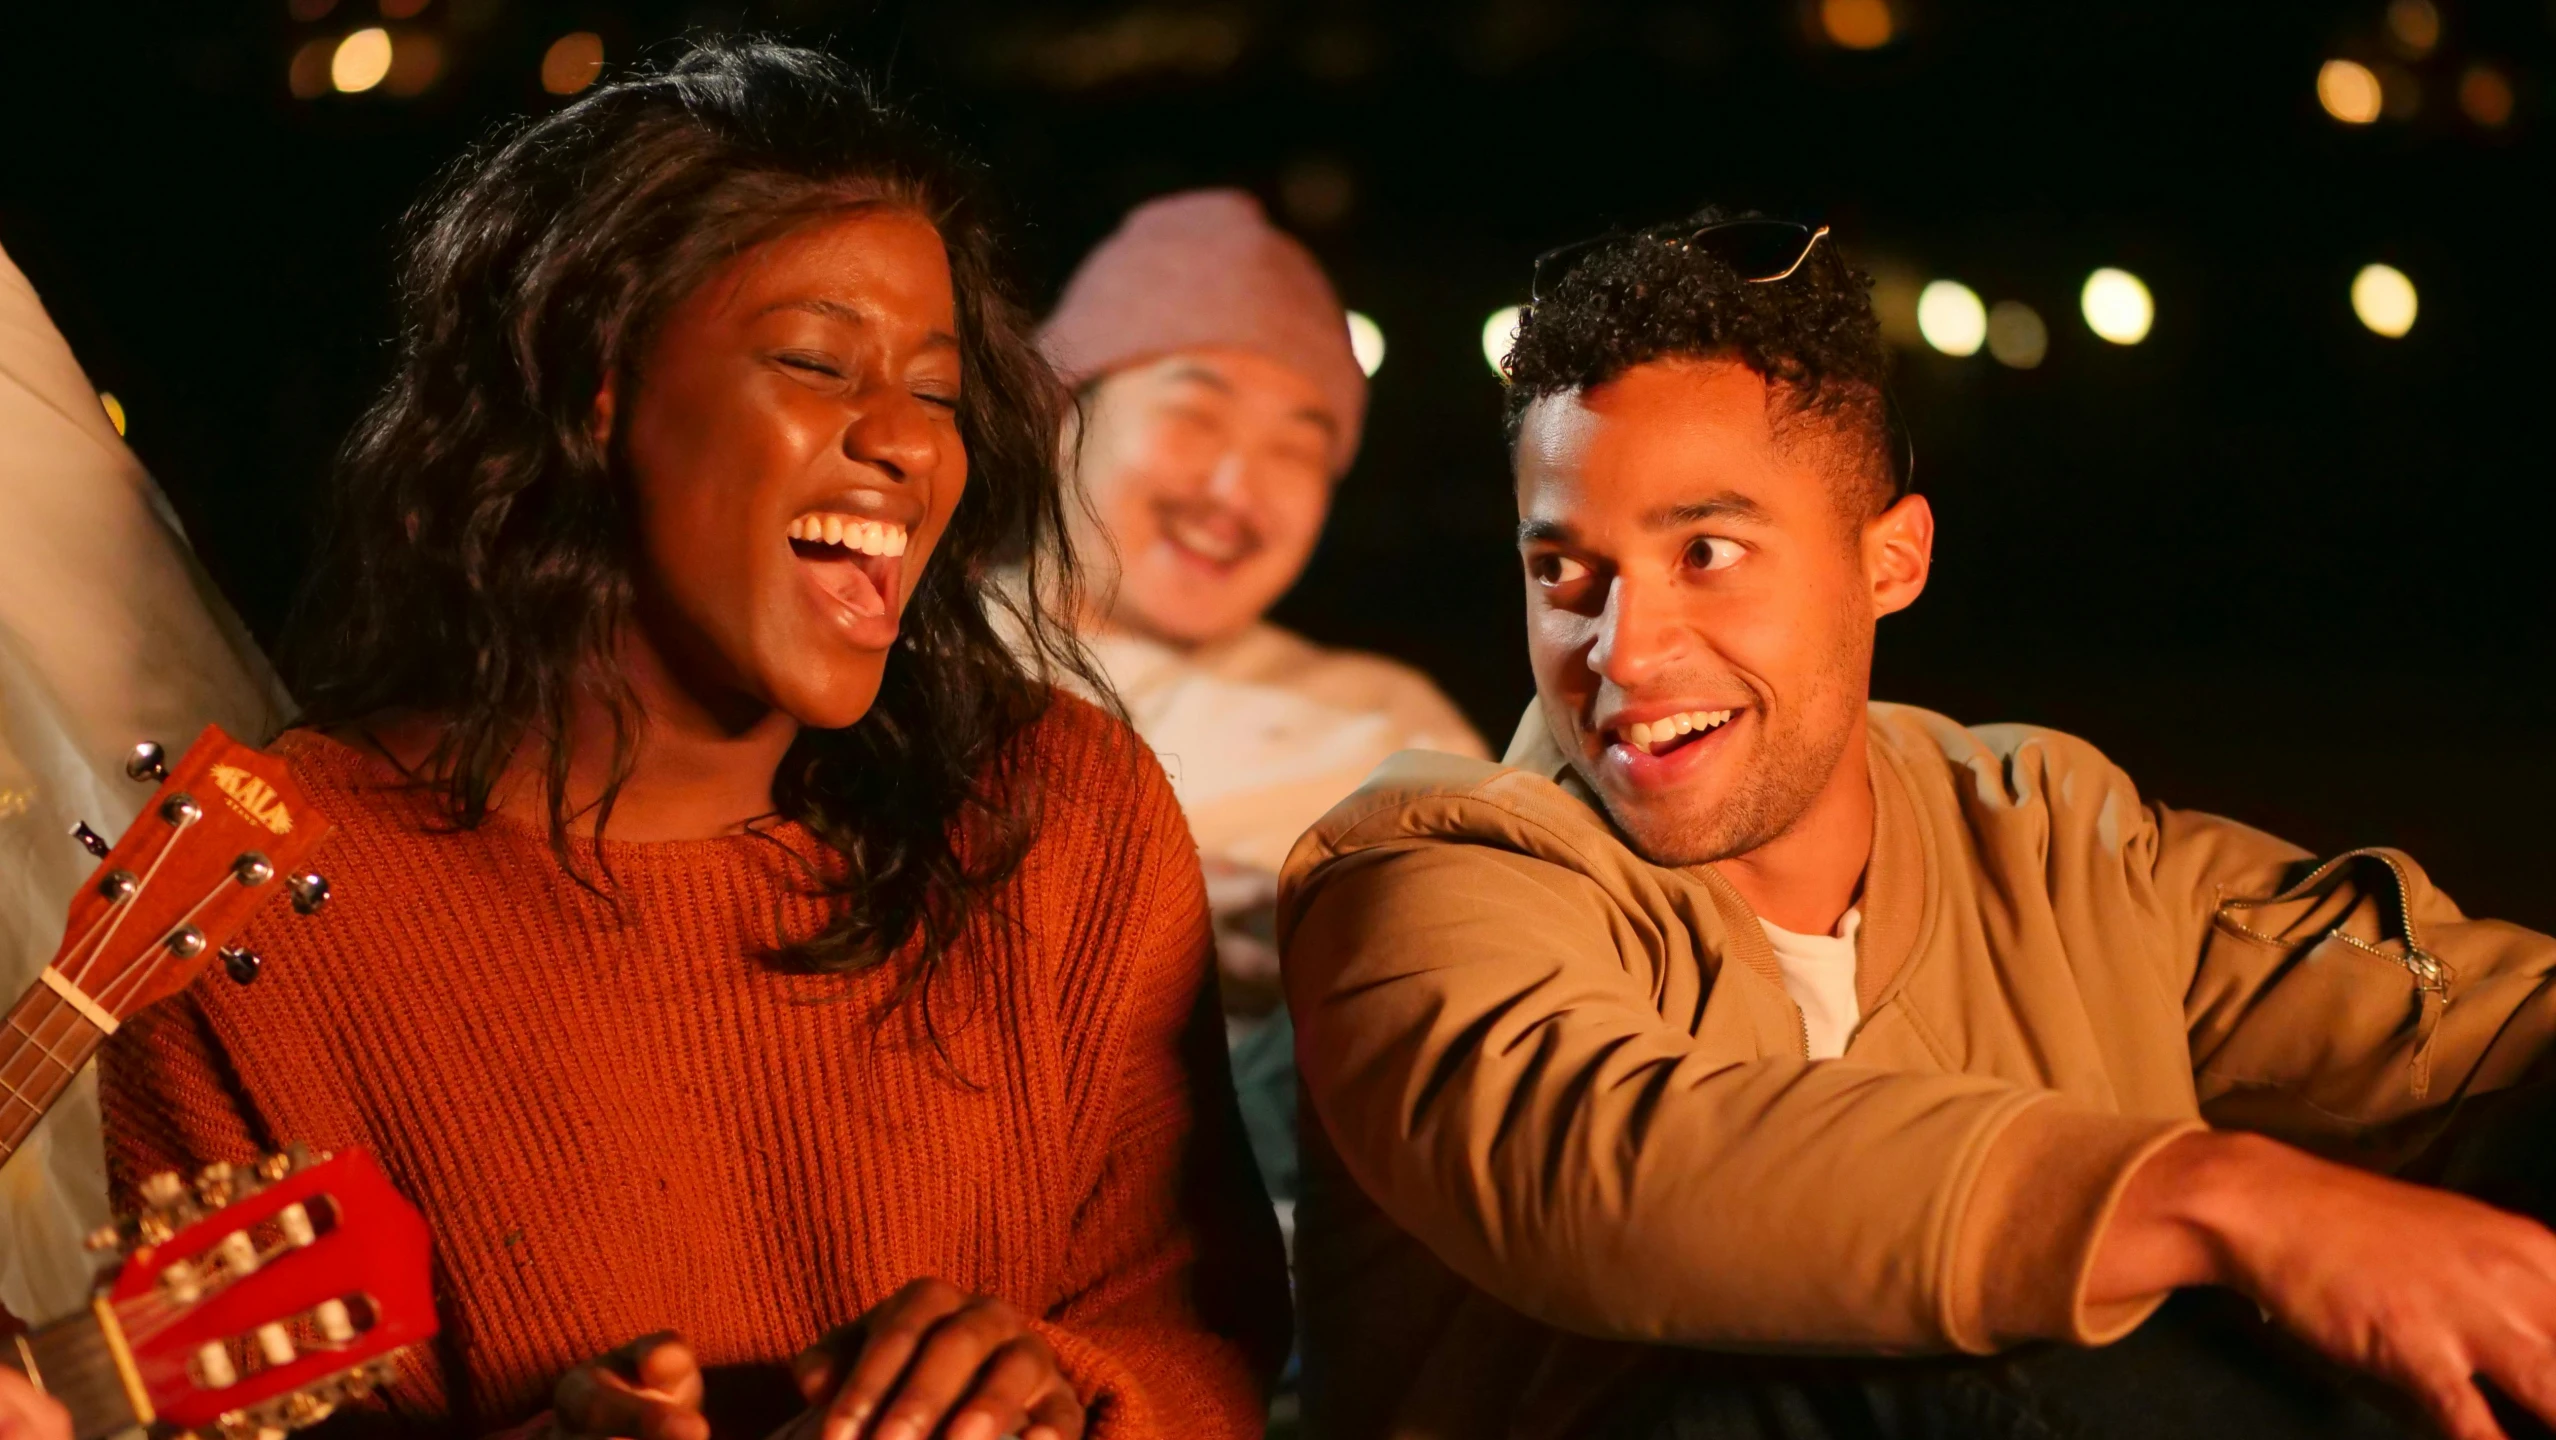 a man and a woman sitting next to each other with a guitar, trending on pexels, happening, brown skin man with a giant grin, night outside, holiday season, 3 actors on stage